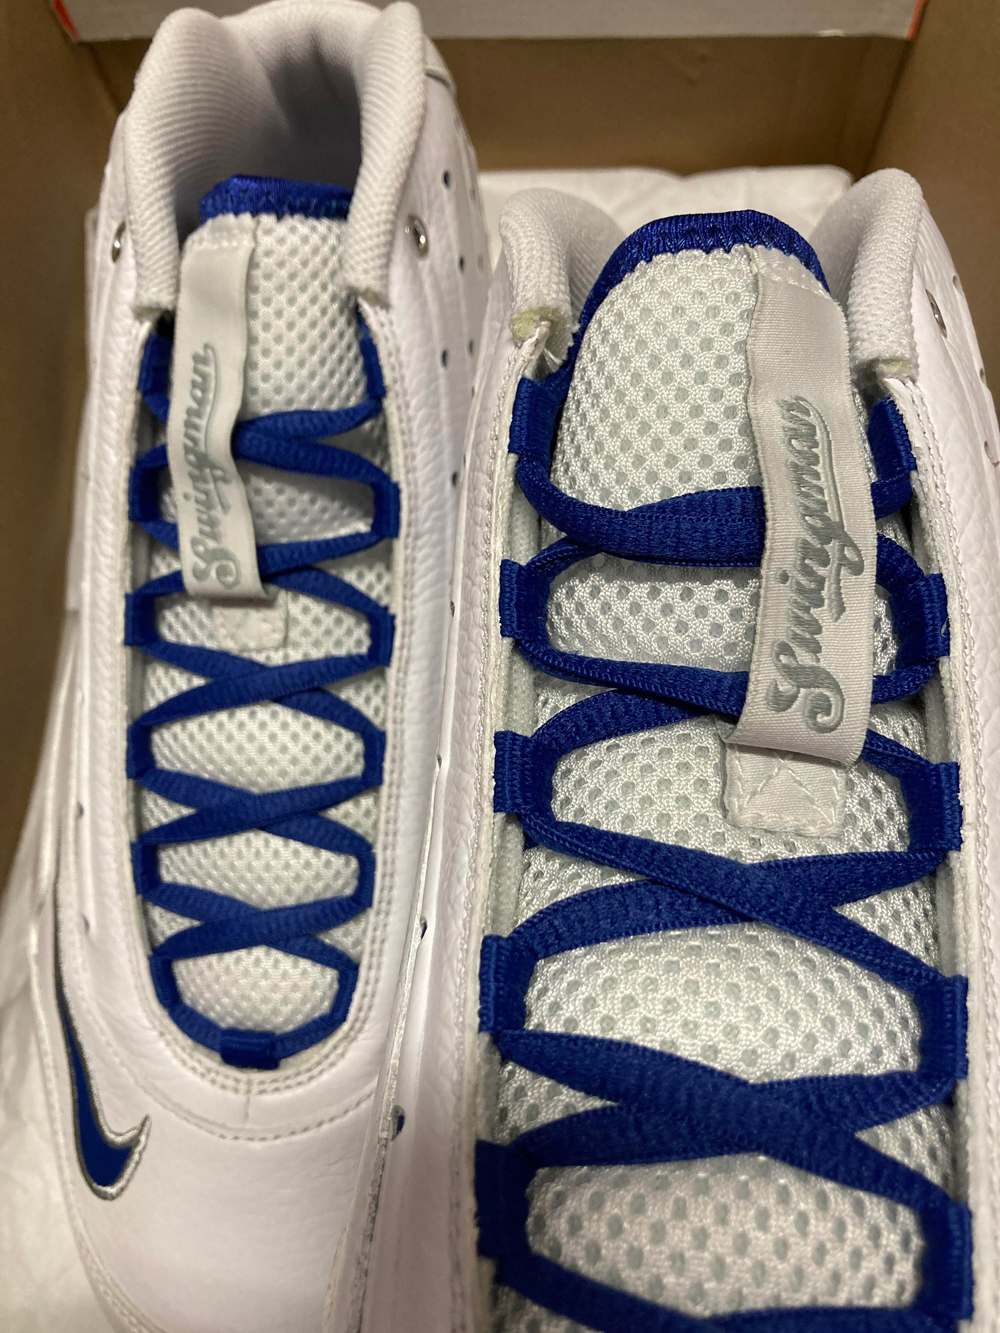 Nike Air Griffey 1 Cleat Jackie Robinson Officially Released